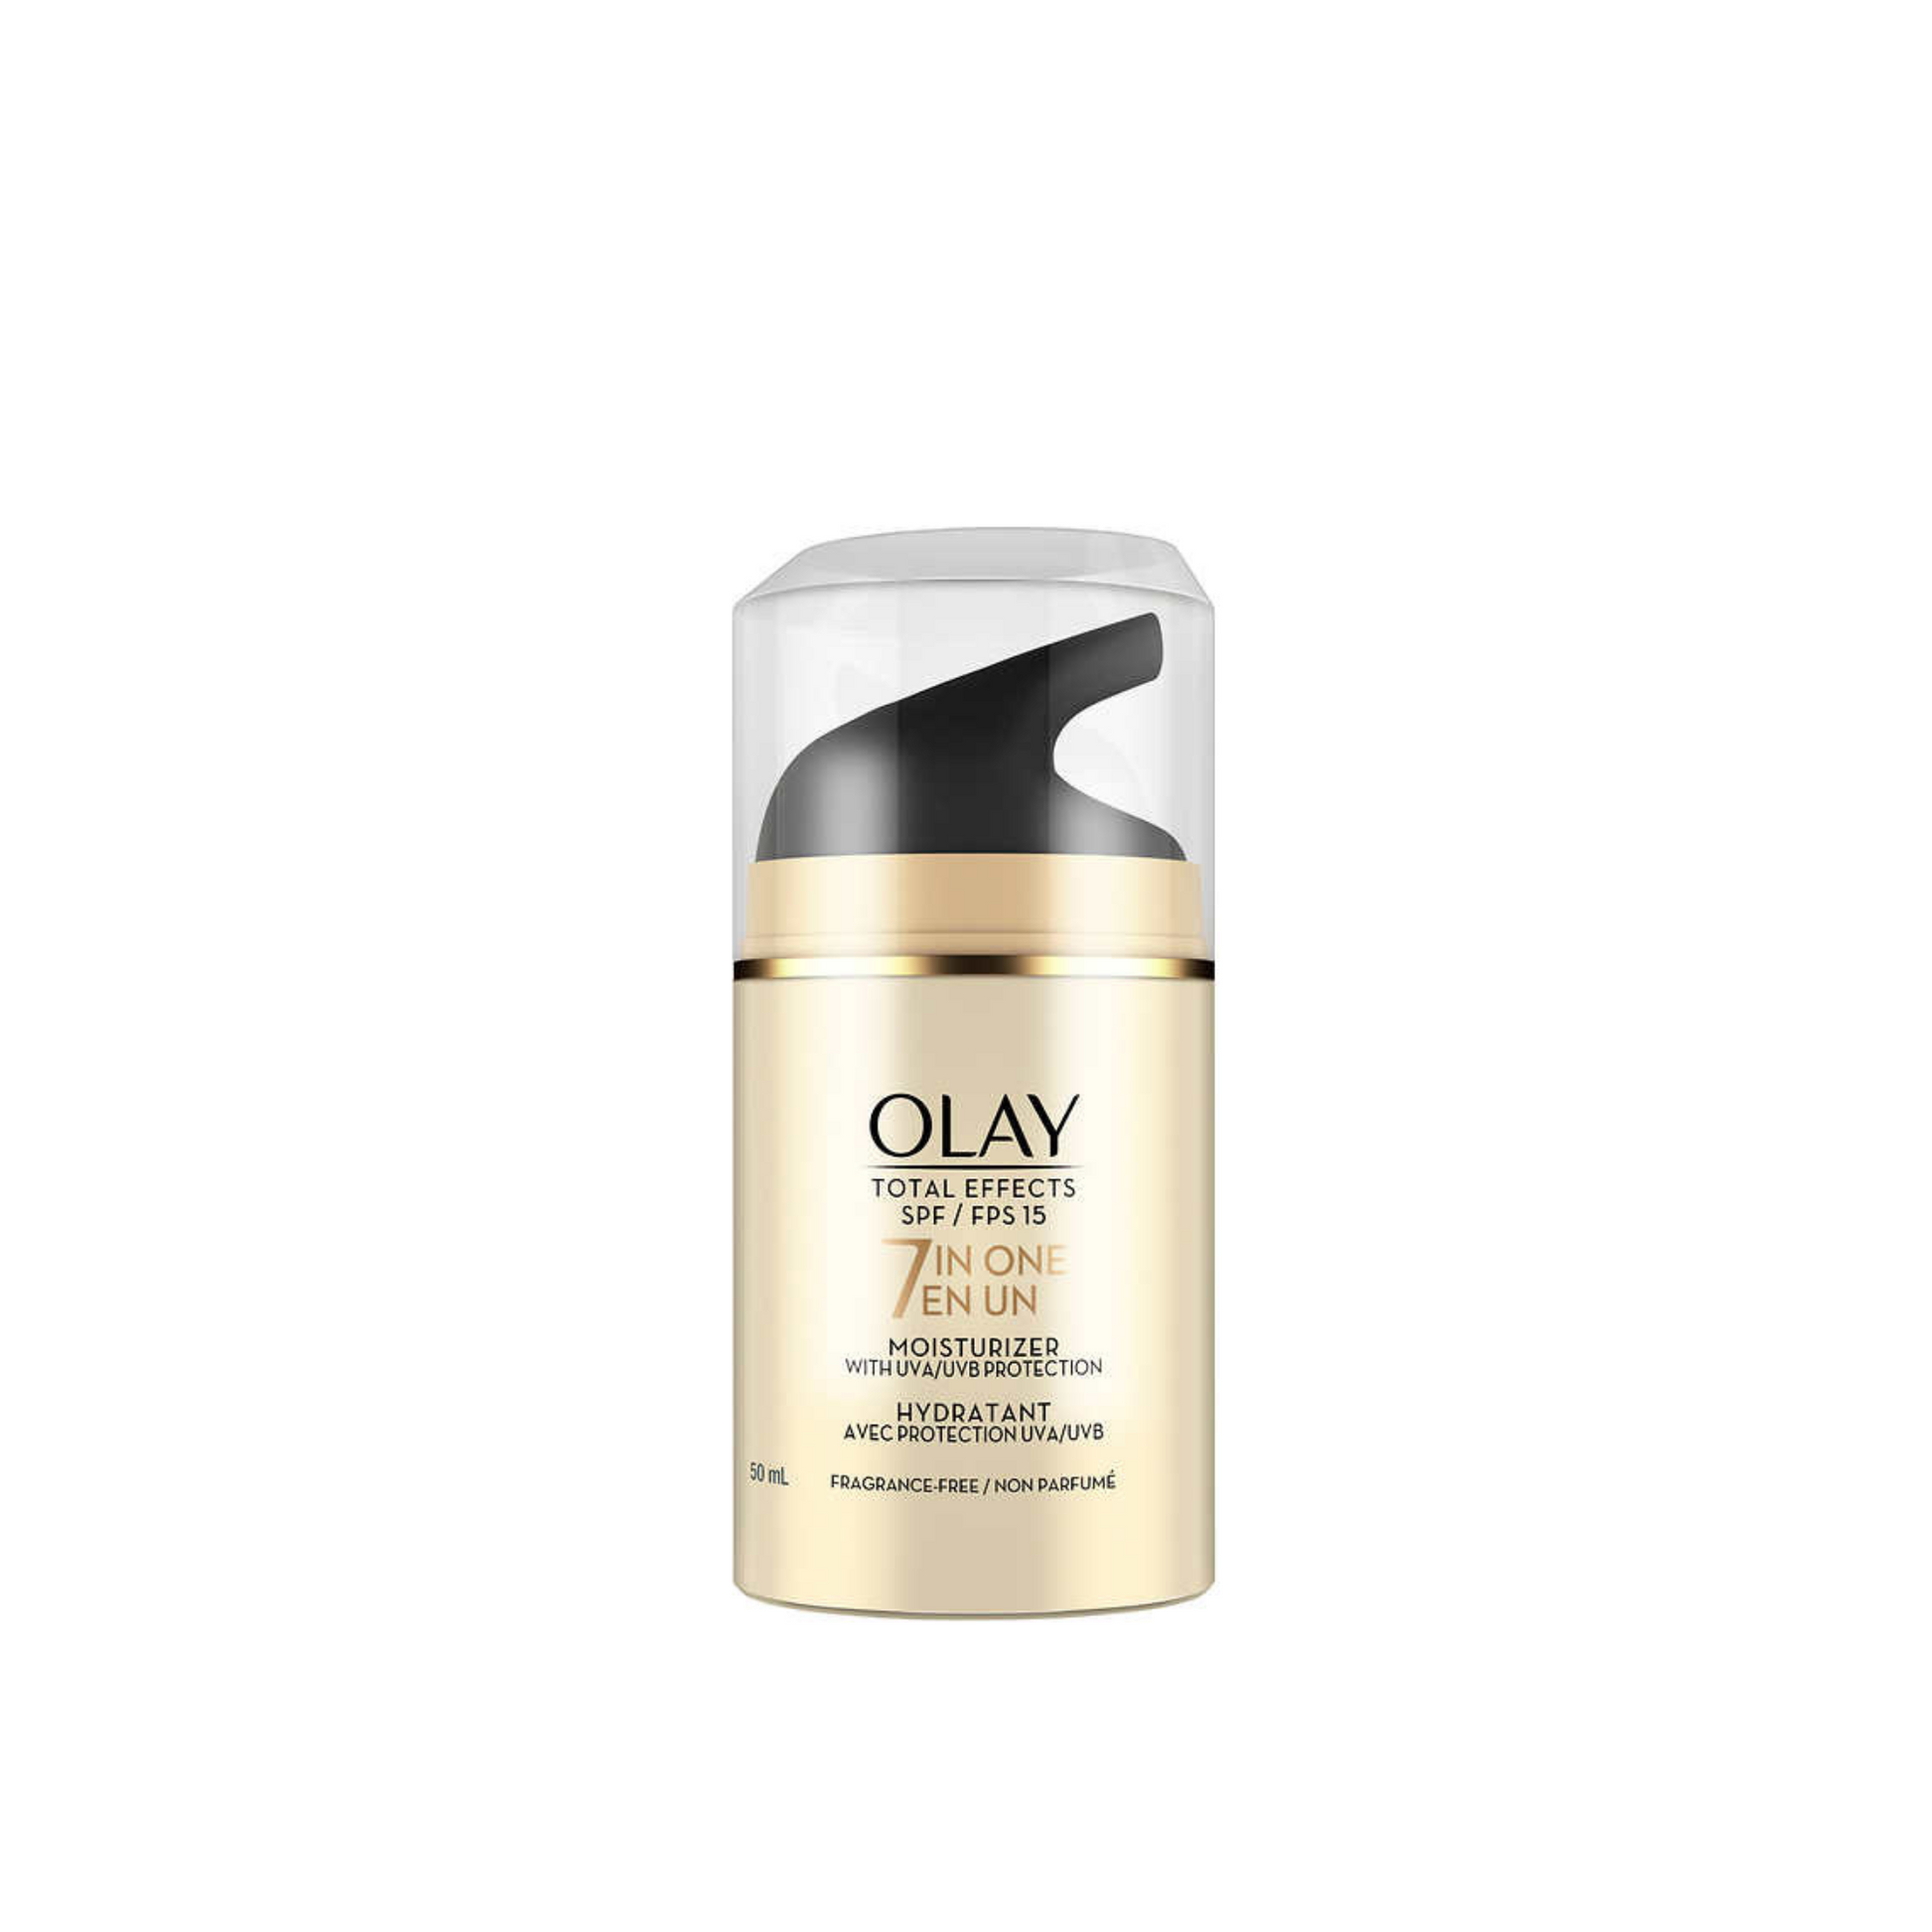 Olay Total Effects Face Moisturizer SPF 15 - 7 in one 2 x 50 mL - canavitam